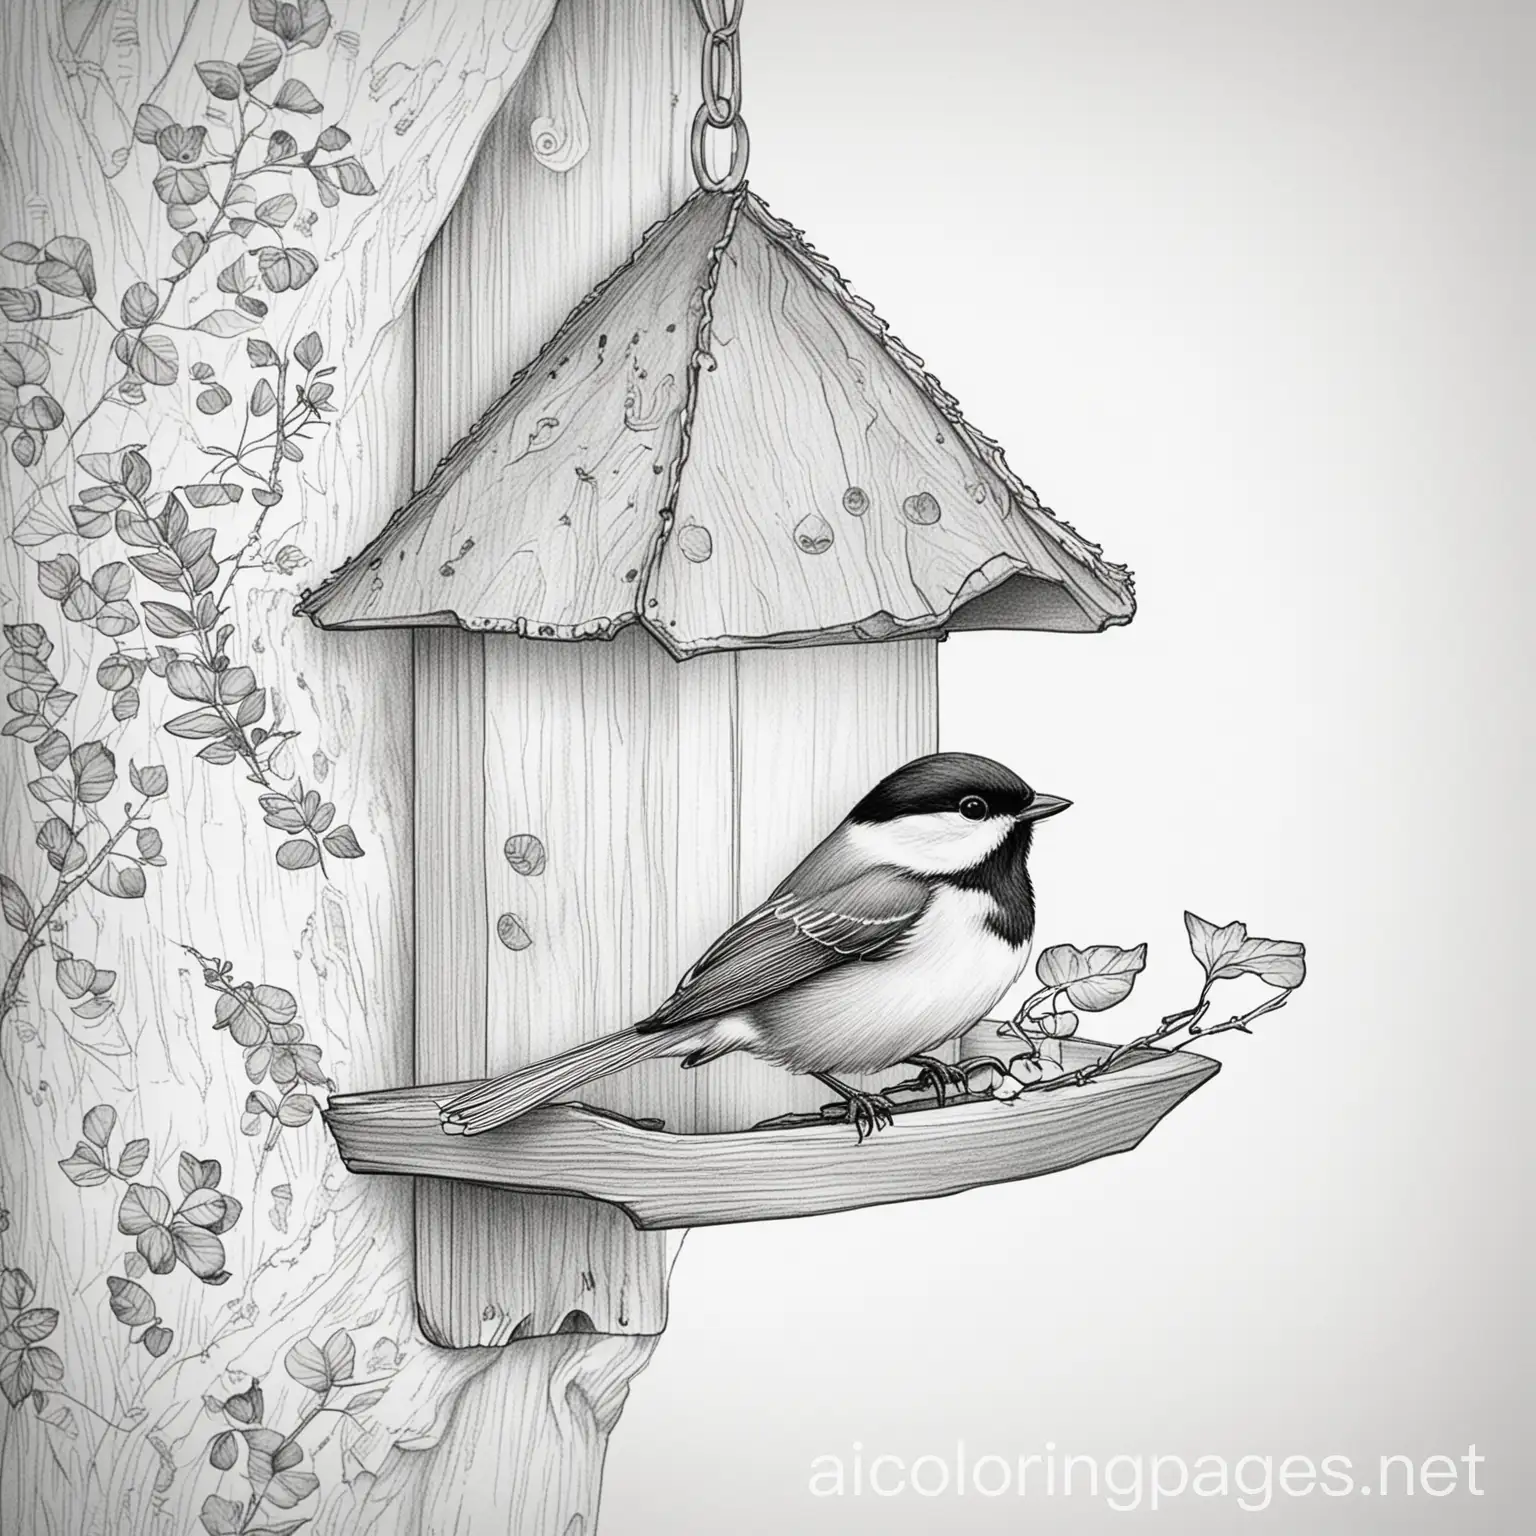  black caped chickadee on bird feeder

, black and white, fine lines, no shading, no colour, Coloring Page, black and white, line art, white background, Simplicity, Ample White Space. The background of the coloring page is plain white to make it easy for young children to color within the lines. The outlines of all the subjects are easy to distinguish, making it simple for kids to color without too much difficulty
